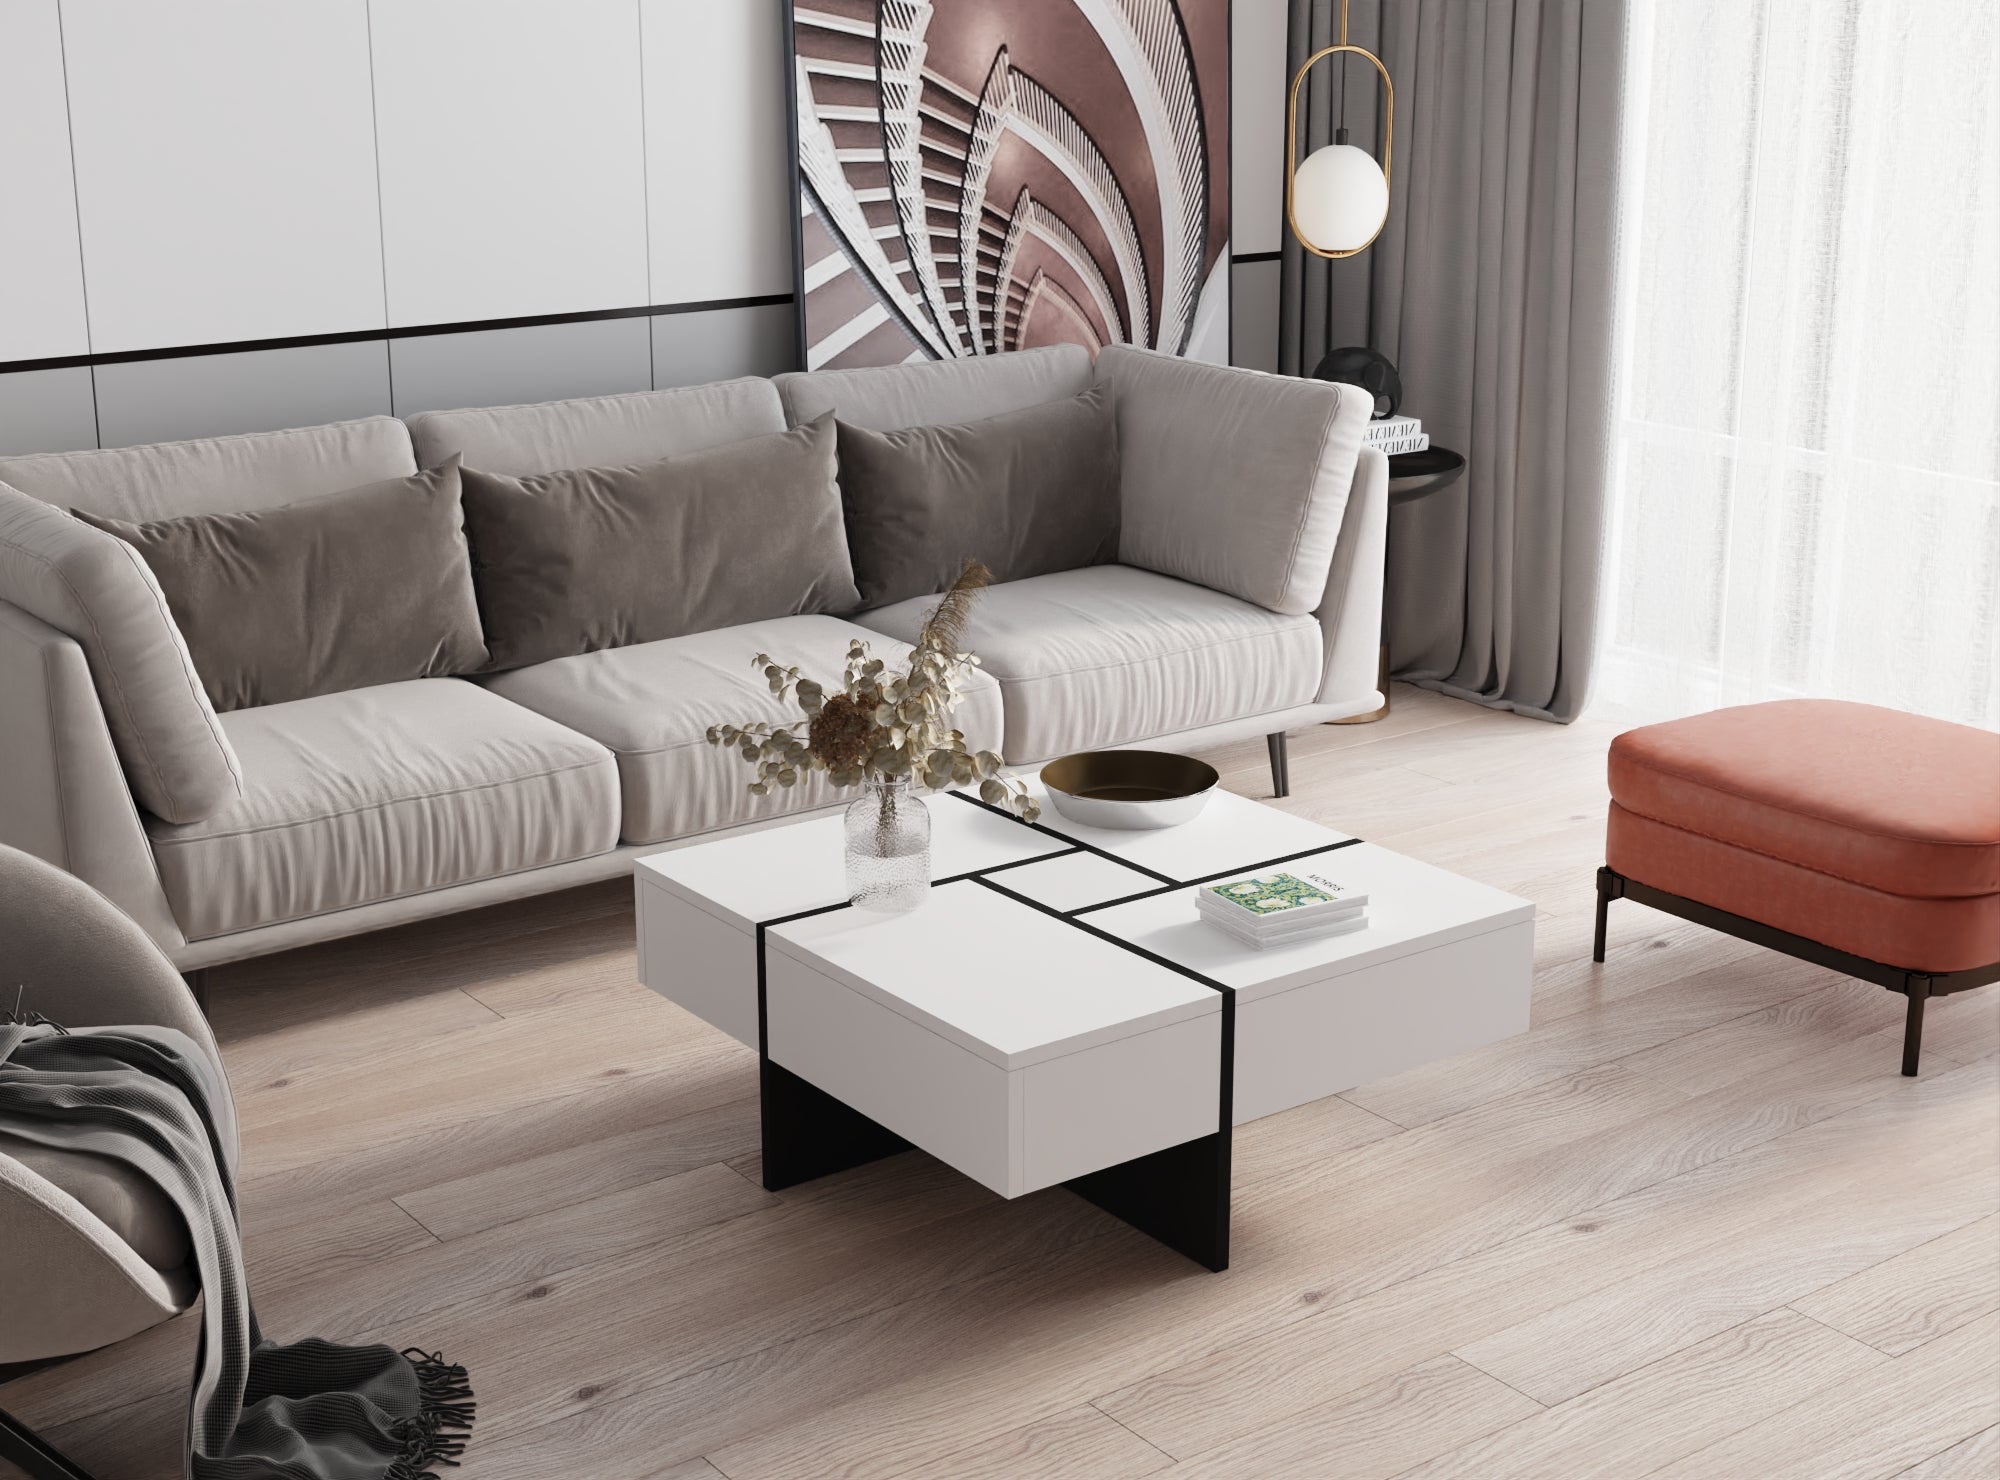 Futuristic White Extendable Coffee Table with Storage